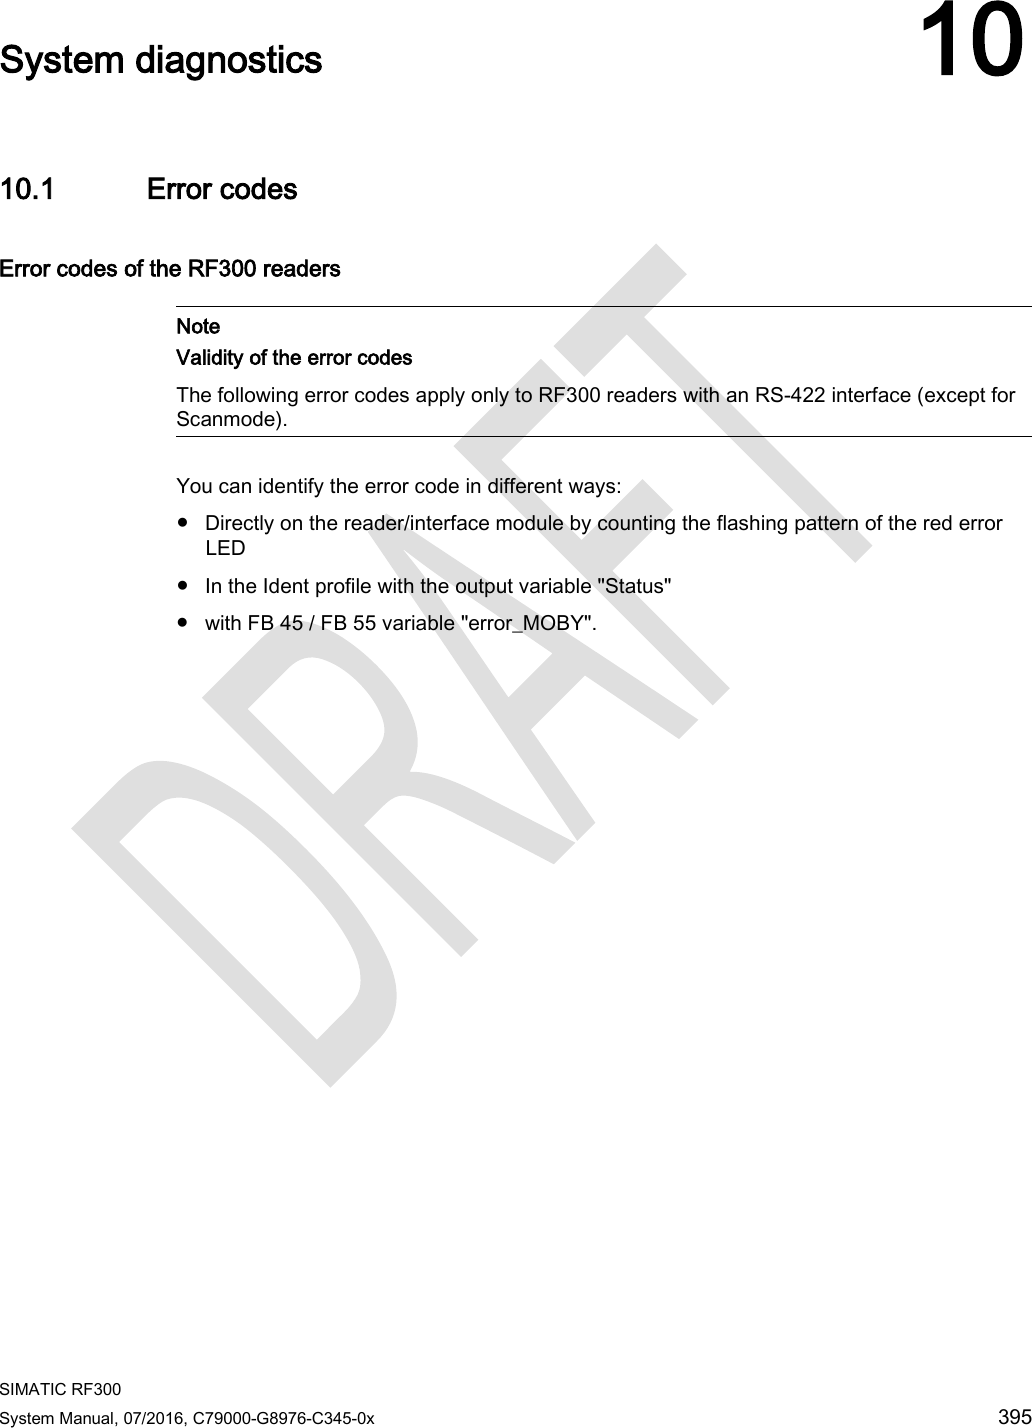  SIMATIC RF300 System Manual, 07/2016, C79000-G8976-C345-0x 395  System diagnostics 10 10.1 Error codes Error codes of the RF300 readers    Note Validity of the error codes The following error codes apply only to RF300 readers with an RS-422 interface (except for Scanmode).  You can identify the error code in different ways: ● Directly on the reader/interface module by counting the flashing pattern of the red error LED ● In the Ident profile with the output variable &quot;Status&quot; ● with FB 45 / FB 55 variable &quot;error_MOBY&quot;.  